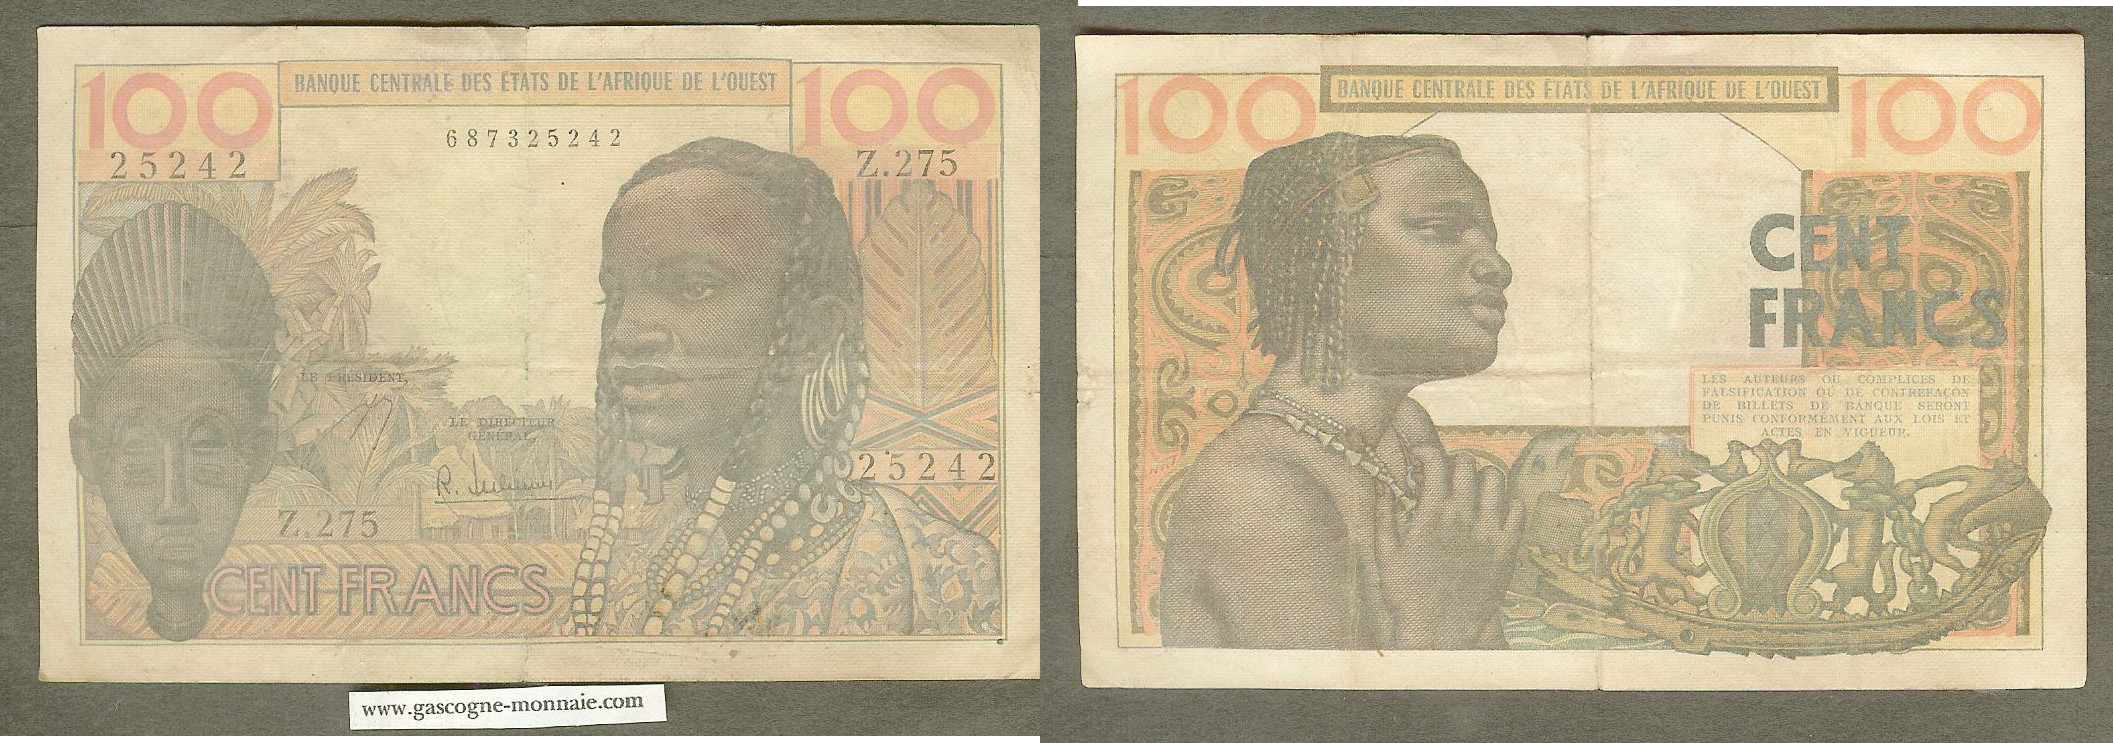 West African States 100 francs 1965 VF+